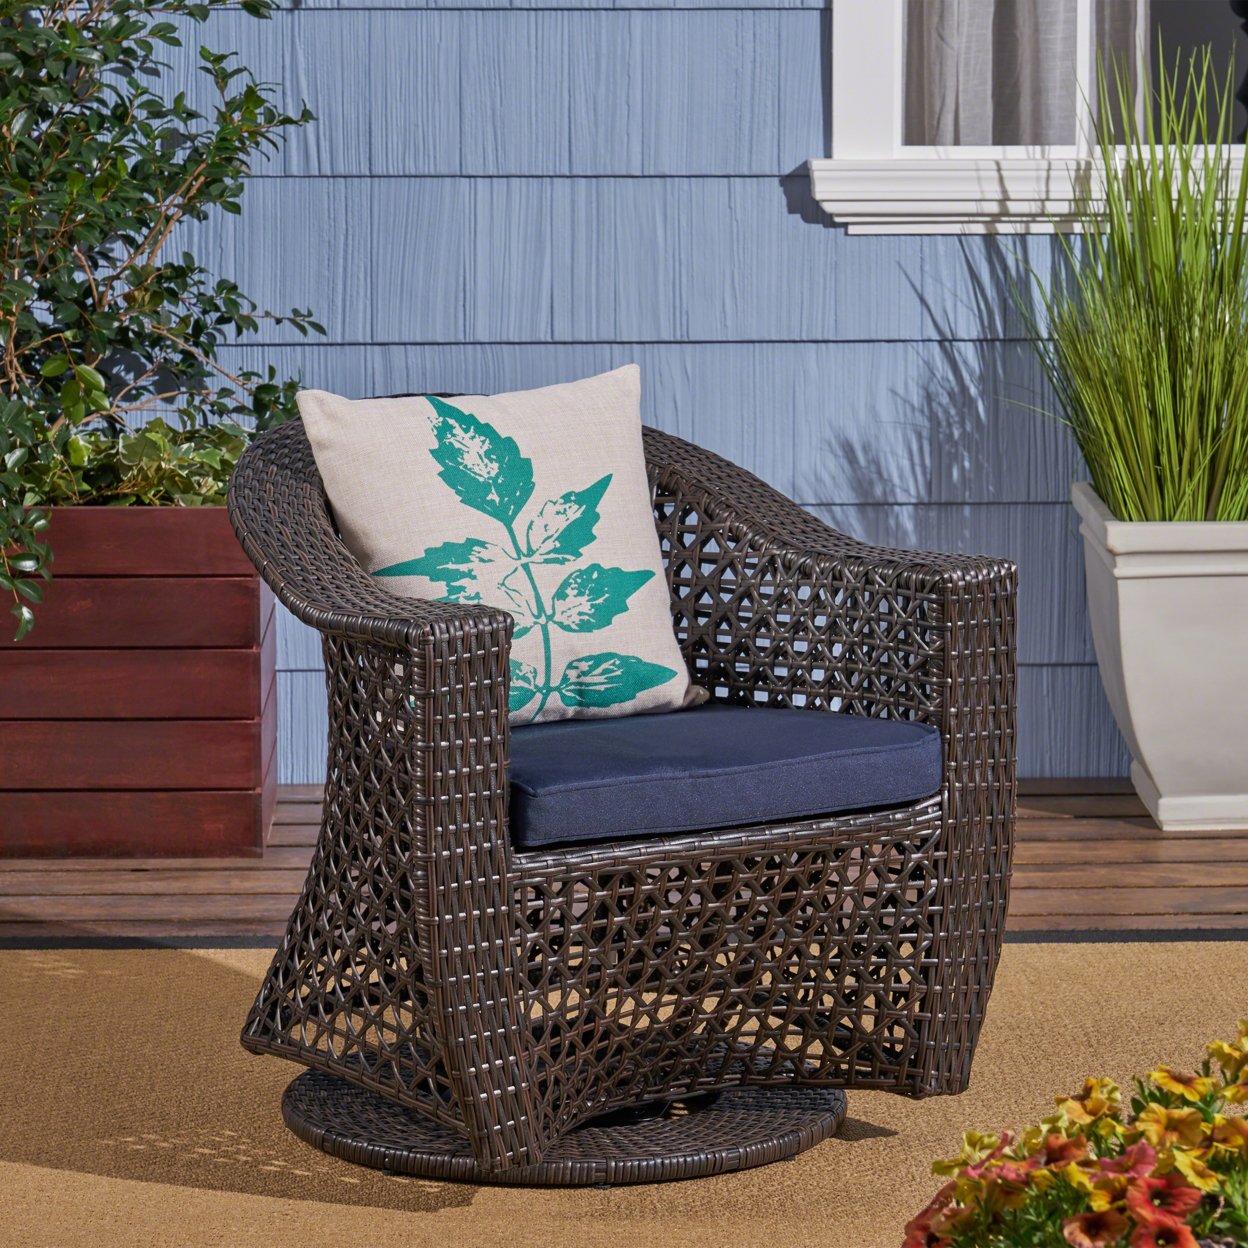 Big Sur Patio Swivel Chair, Wicker With Outdoor Cushions, Multi-Brown, Navy Blue - Set Of 2